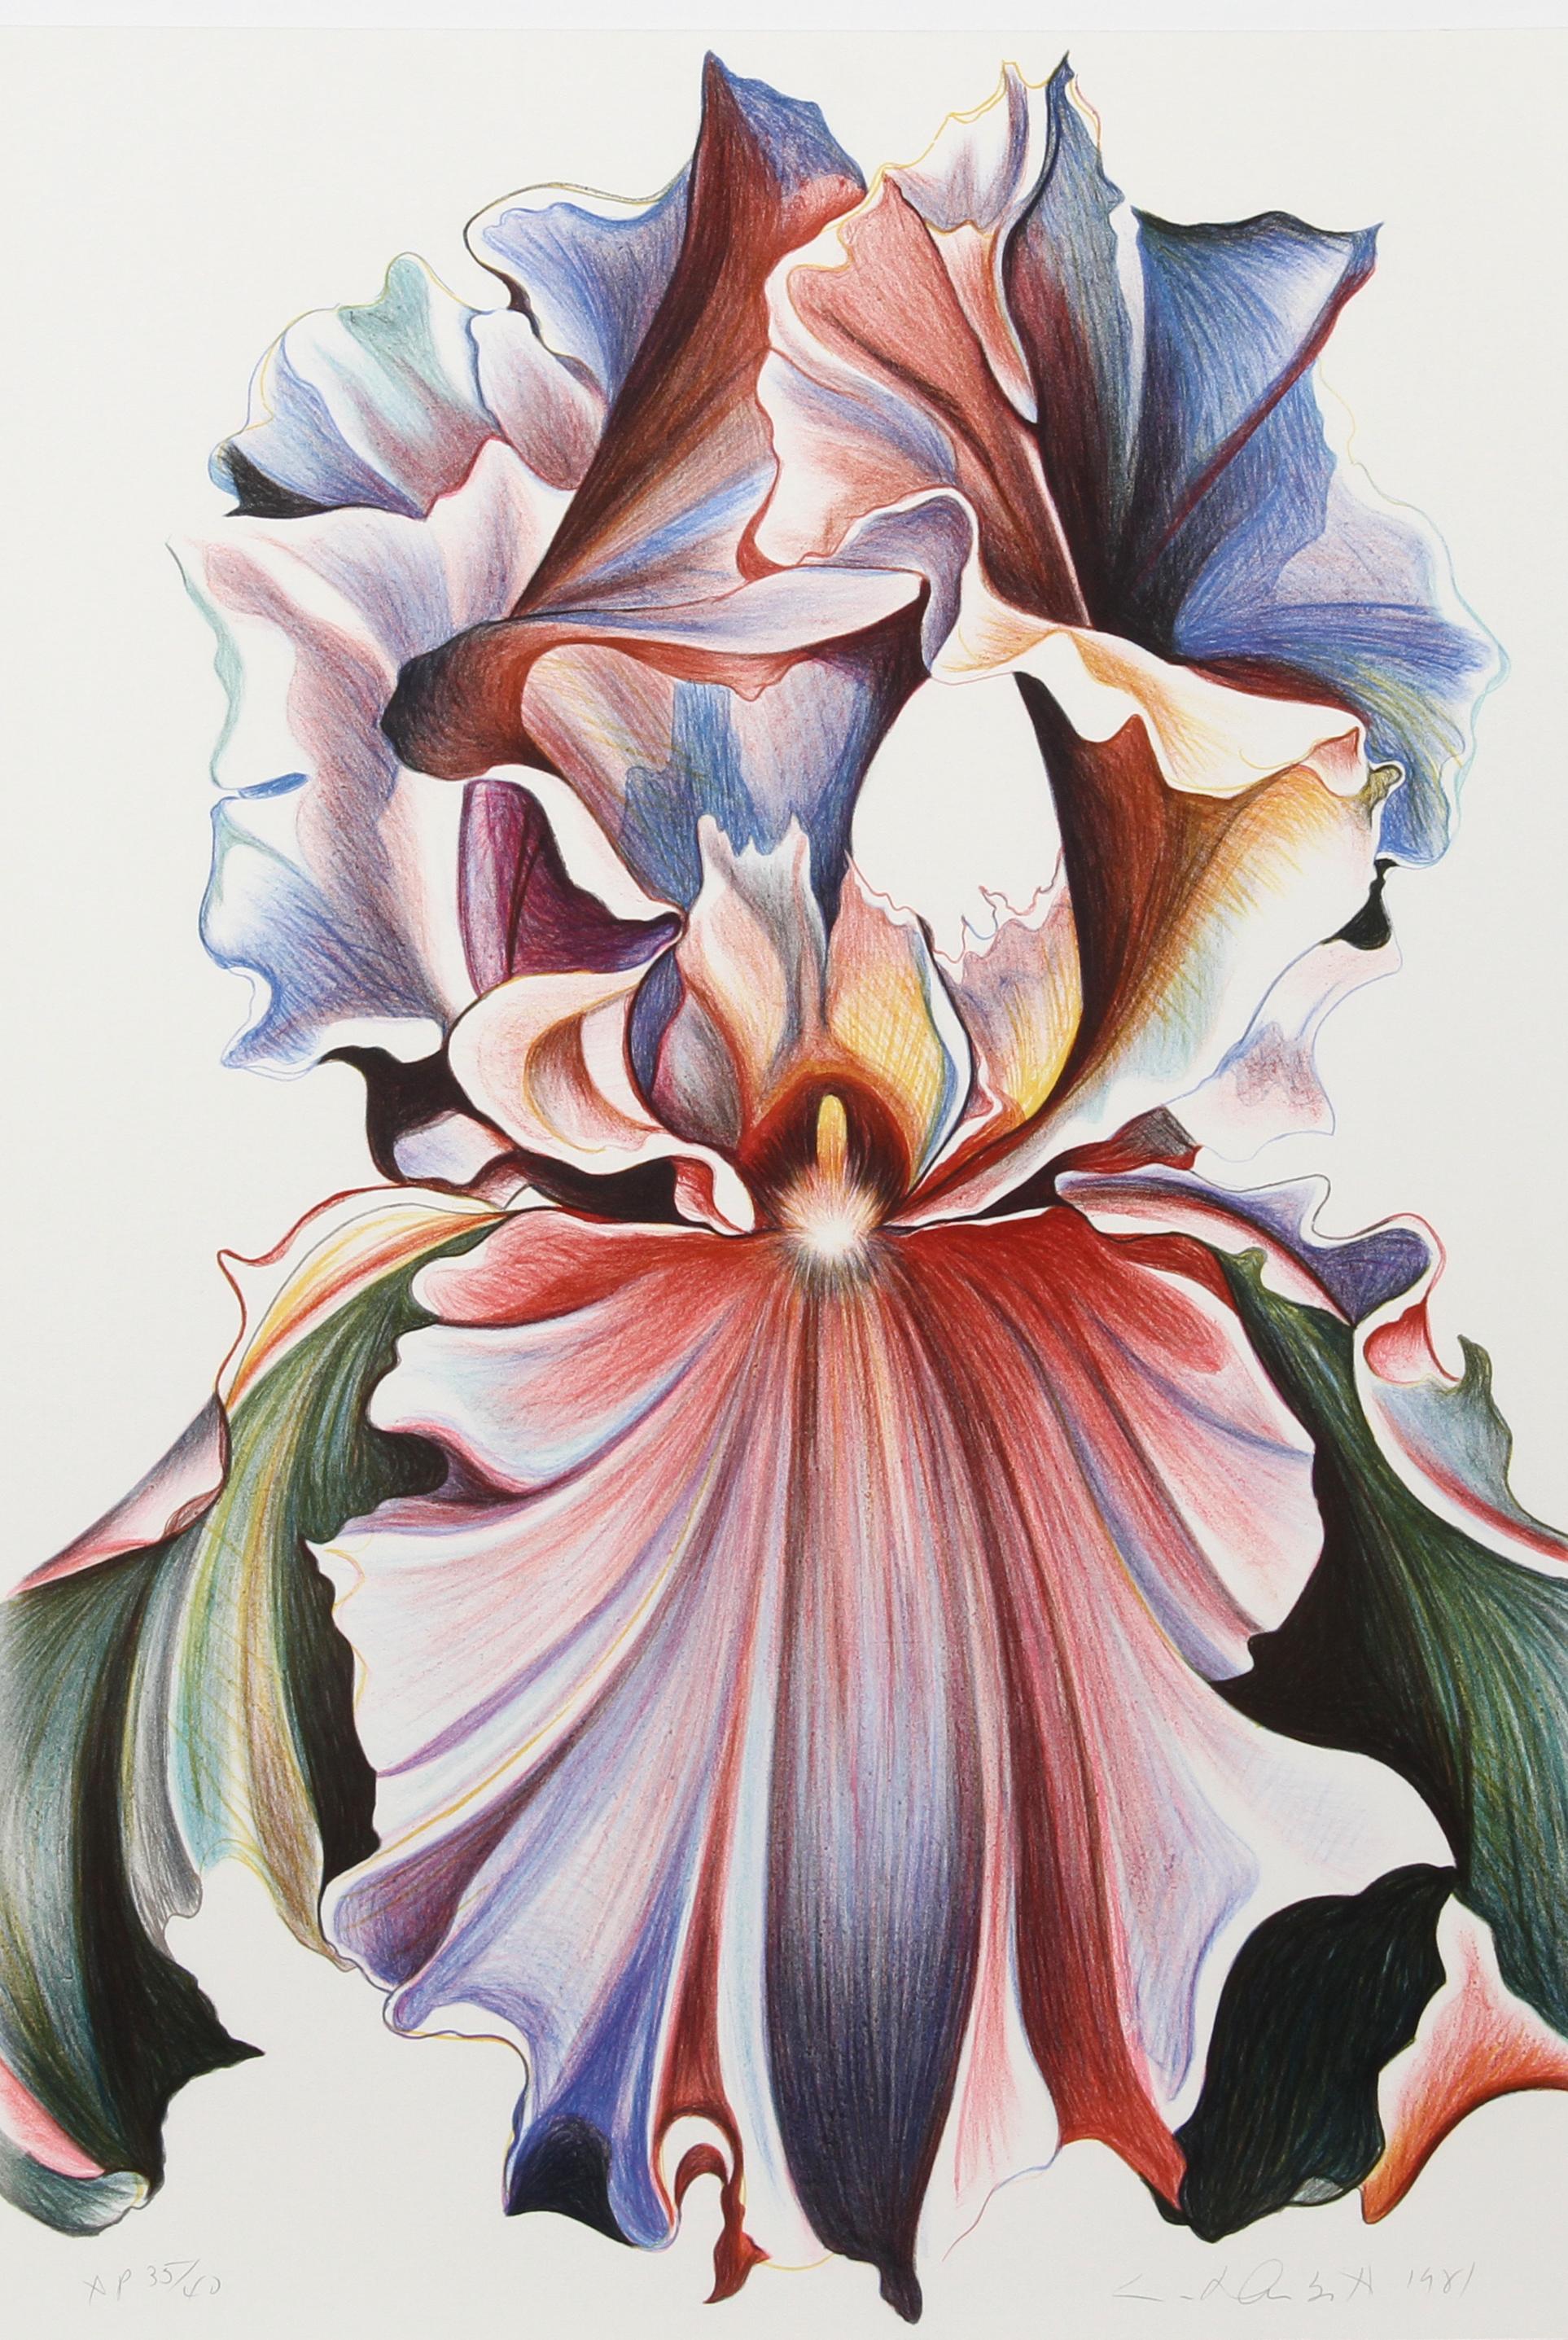 Artist: Lowell Blair Nesbitt, American (1933 - 1993)
Title: Multicolor Iris
Year: 1981
Medium: Serigraph, signed and numbered in pencil
Edition: 200
Size: 36 x 25 in. (91.44 x 63.5 cm)